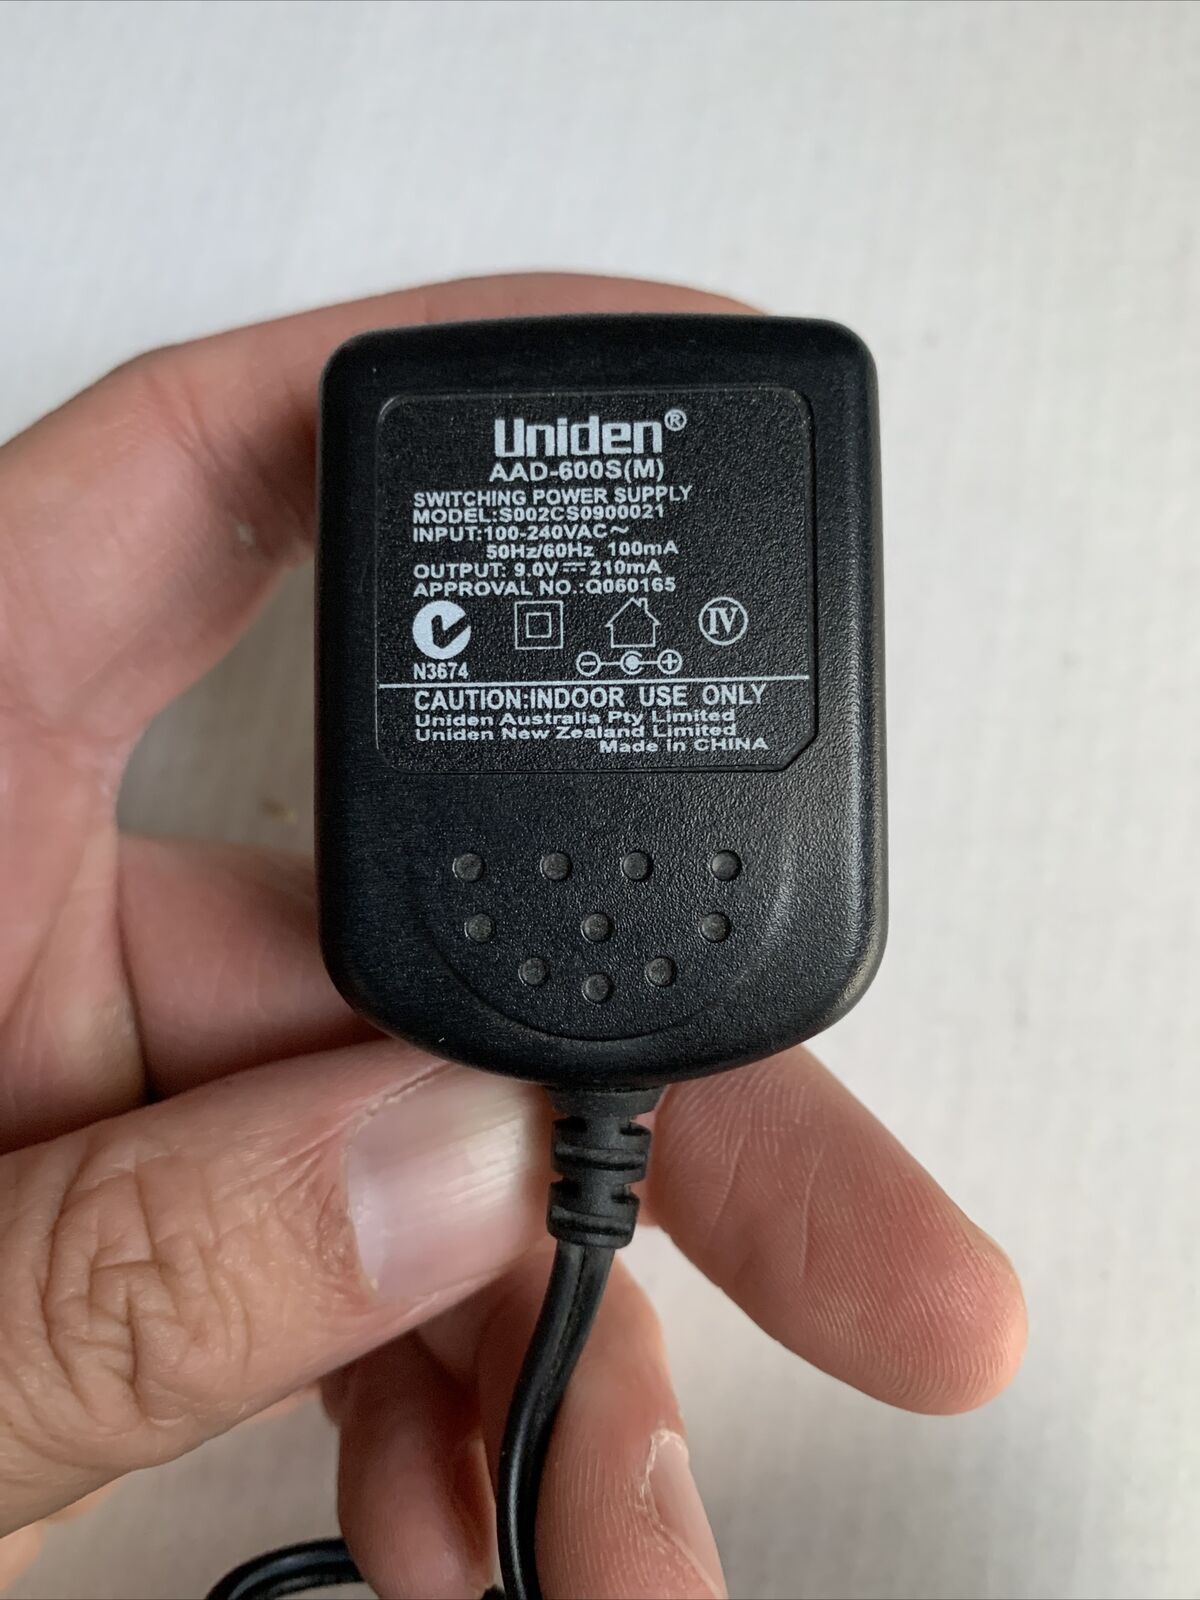 Genuine Uniden Cordless Telephone Charger & AC Adapter AAD-600S(M) 9v 210mA